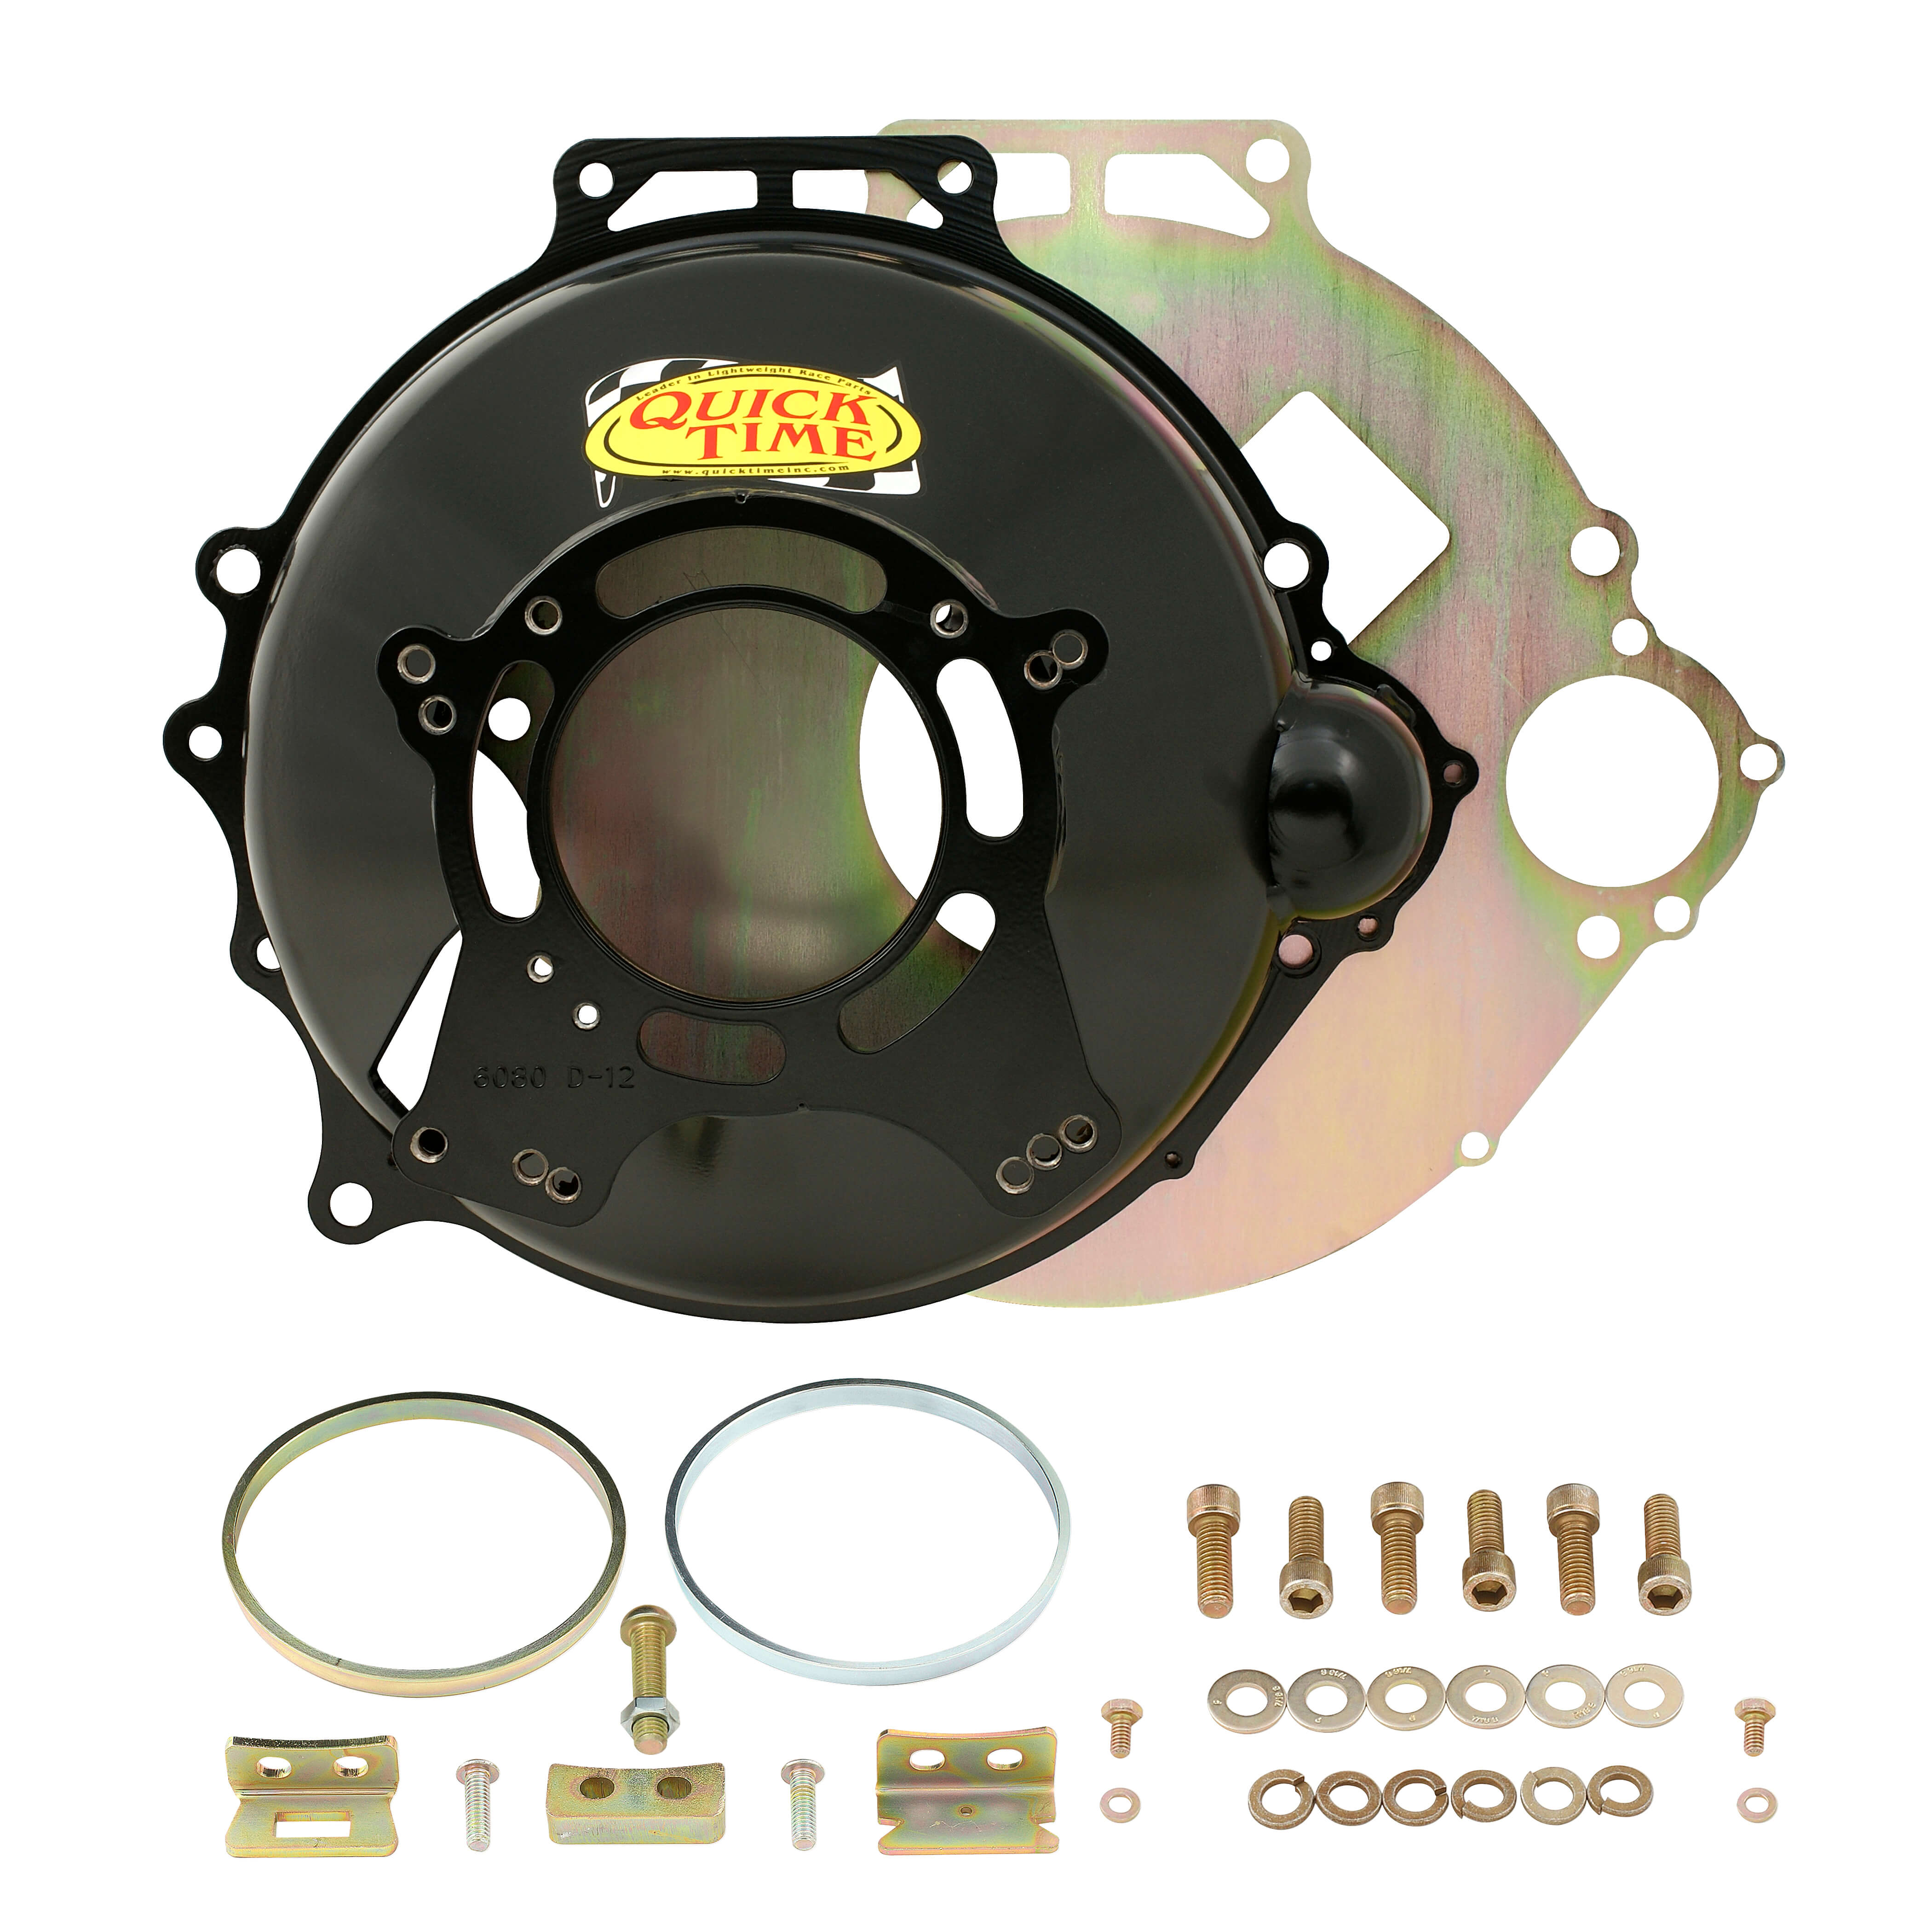 Quick Time Bellhousing Ford Modular 4.6, 5.0, 5.4 and More to Ford TKX/TKO/TR3550